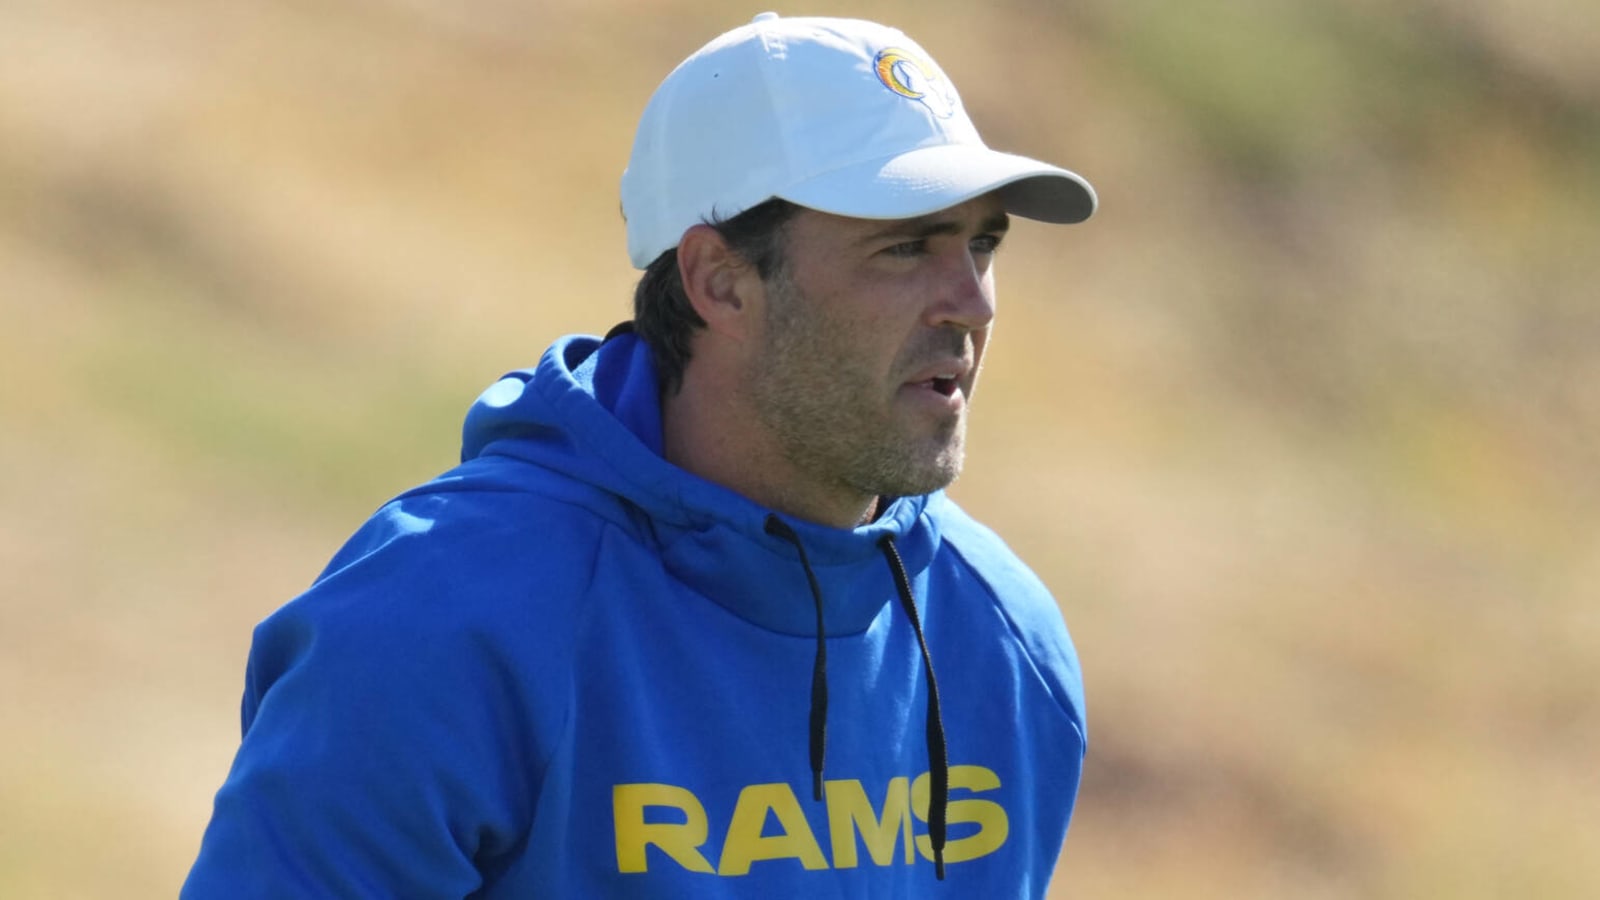 Rams’ Zac Robinson OC candidate for Chargers, Ravens Yardbarker